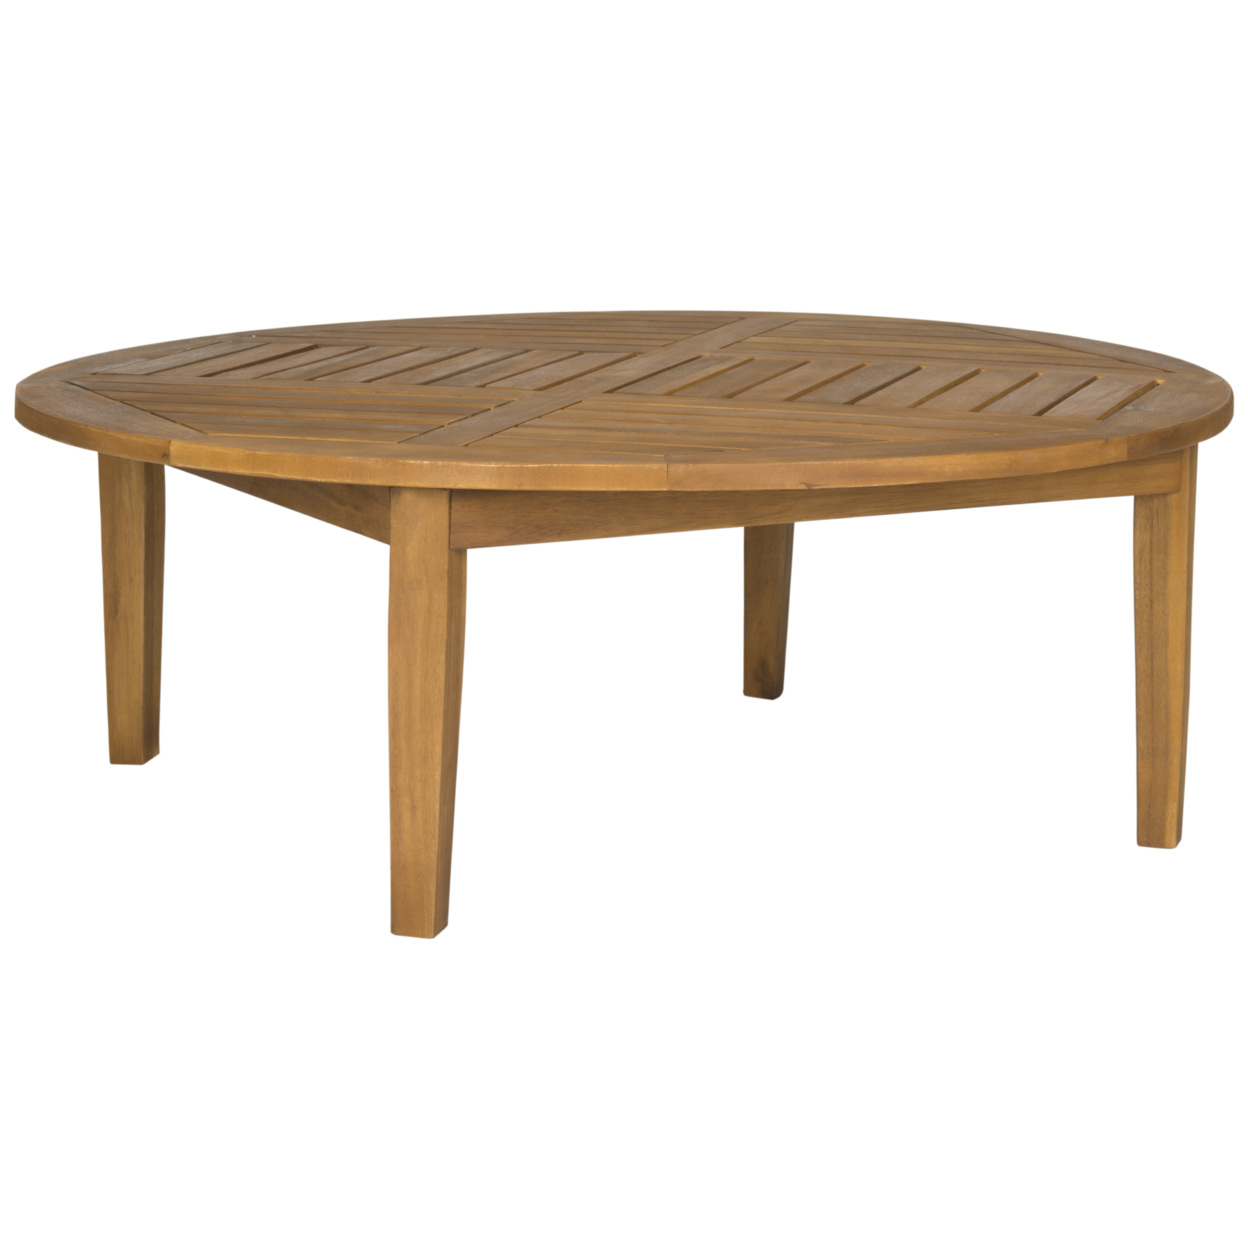 SAFAVIEH Outdoor Collection Danville Round Table Natural